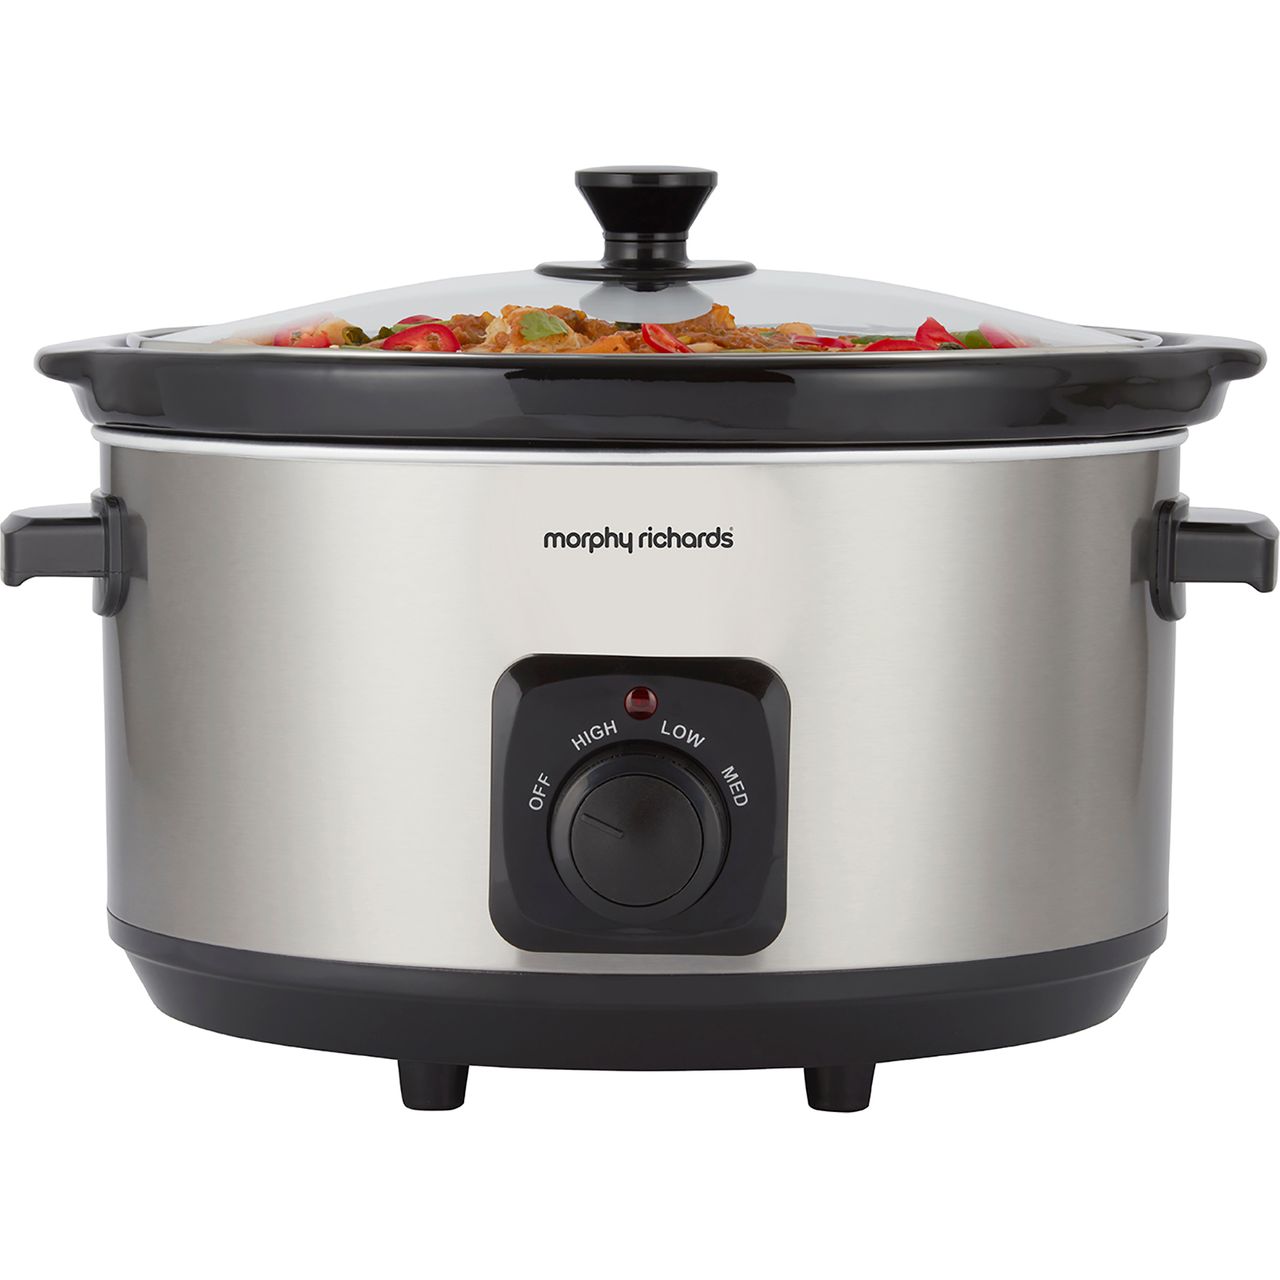 Morphy Richards 461013 6.5 Litre Slow Cooker Review